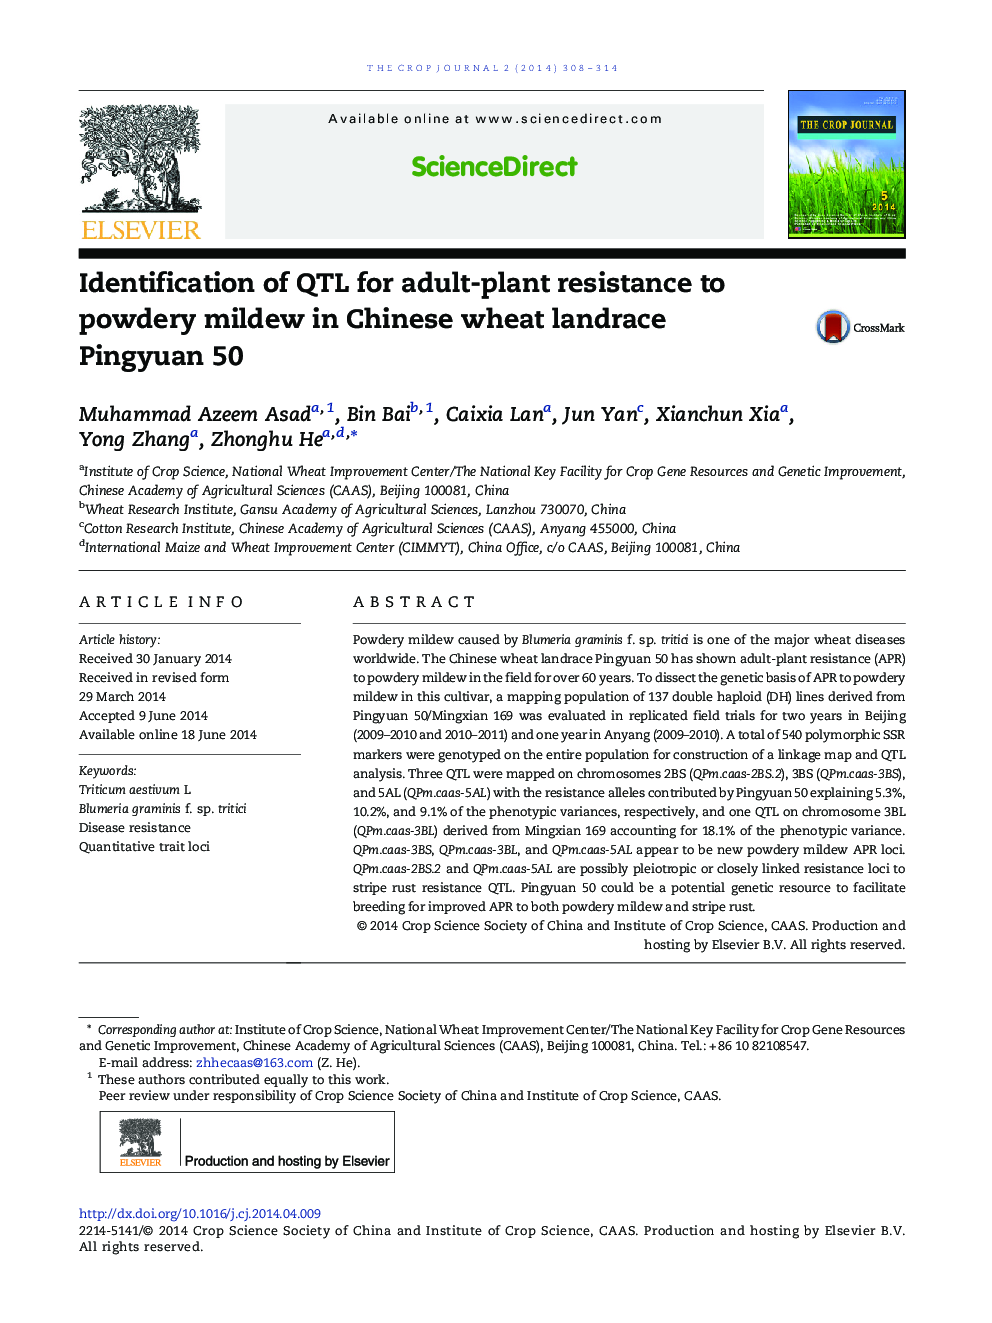 Identification of QTL for adult-plant resistance to powdery mildew in Chinese wheat landrace Pingyuan 50 